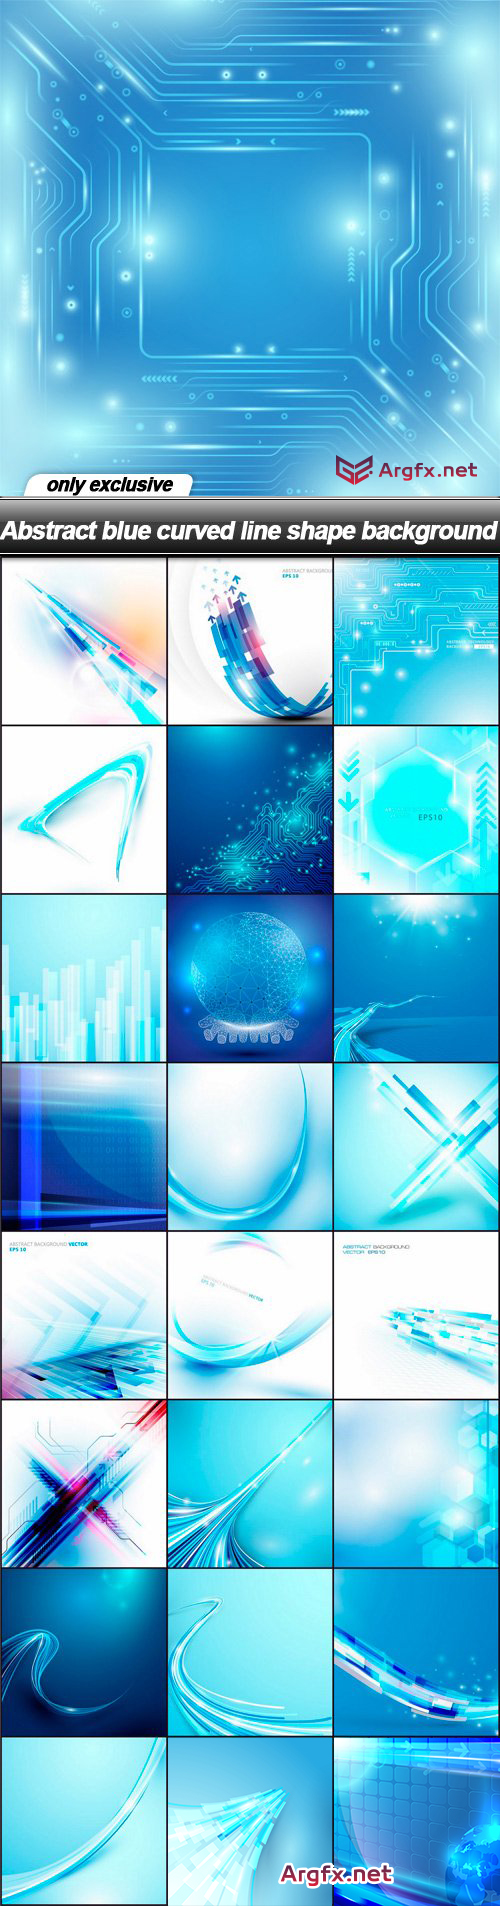 Abstract blue curved line shape background